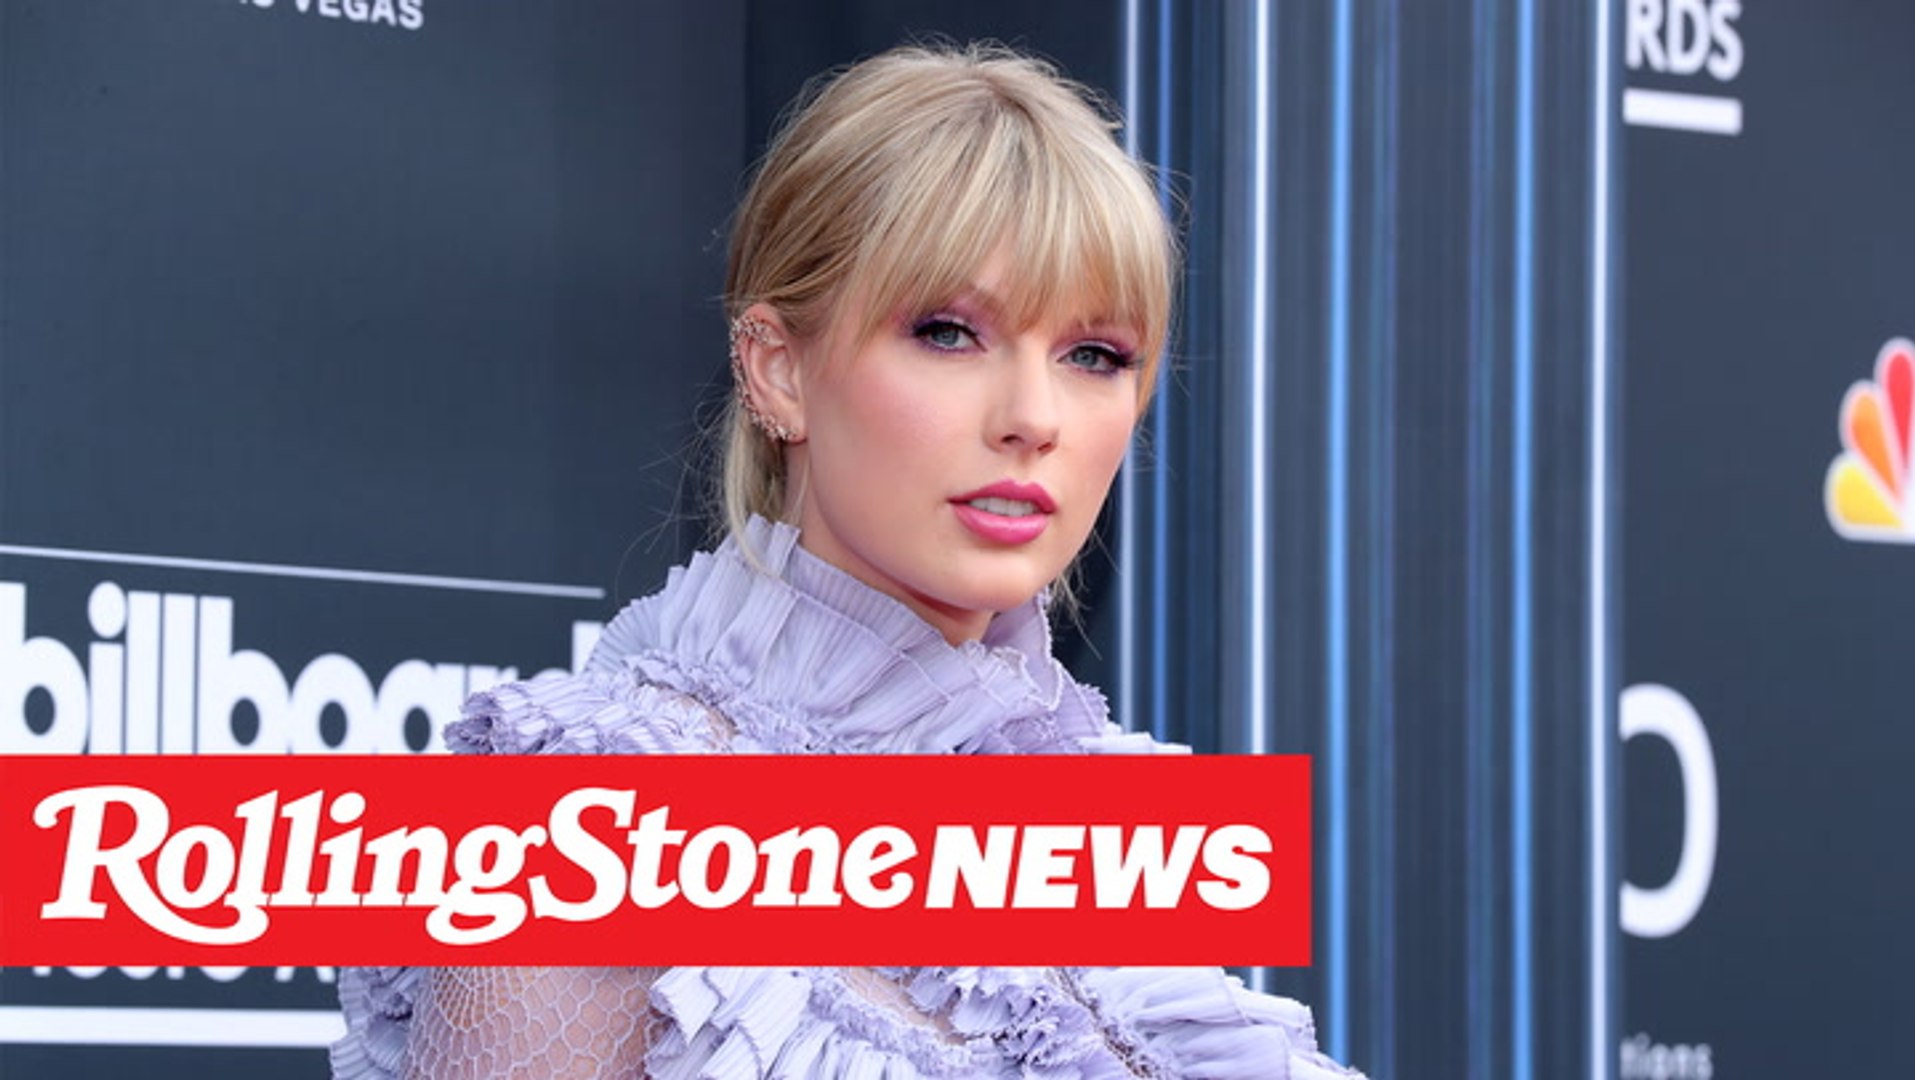 Taylor Swift Rep on ‘Shake It Off’ Lawsuit Revival | RS News 10/30/19